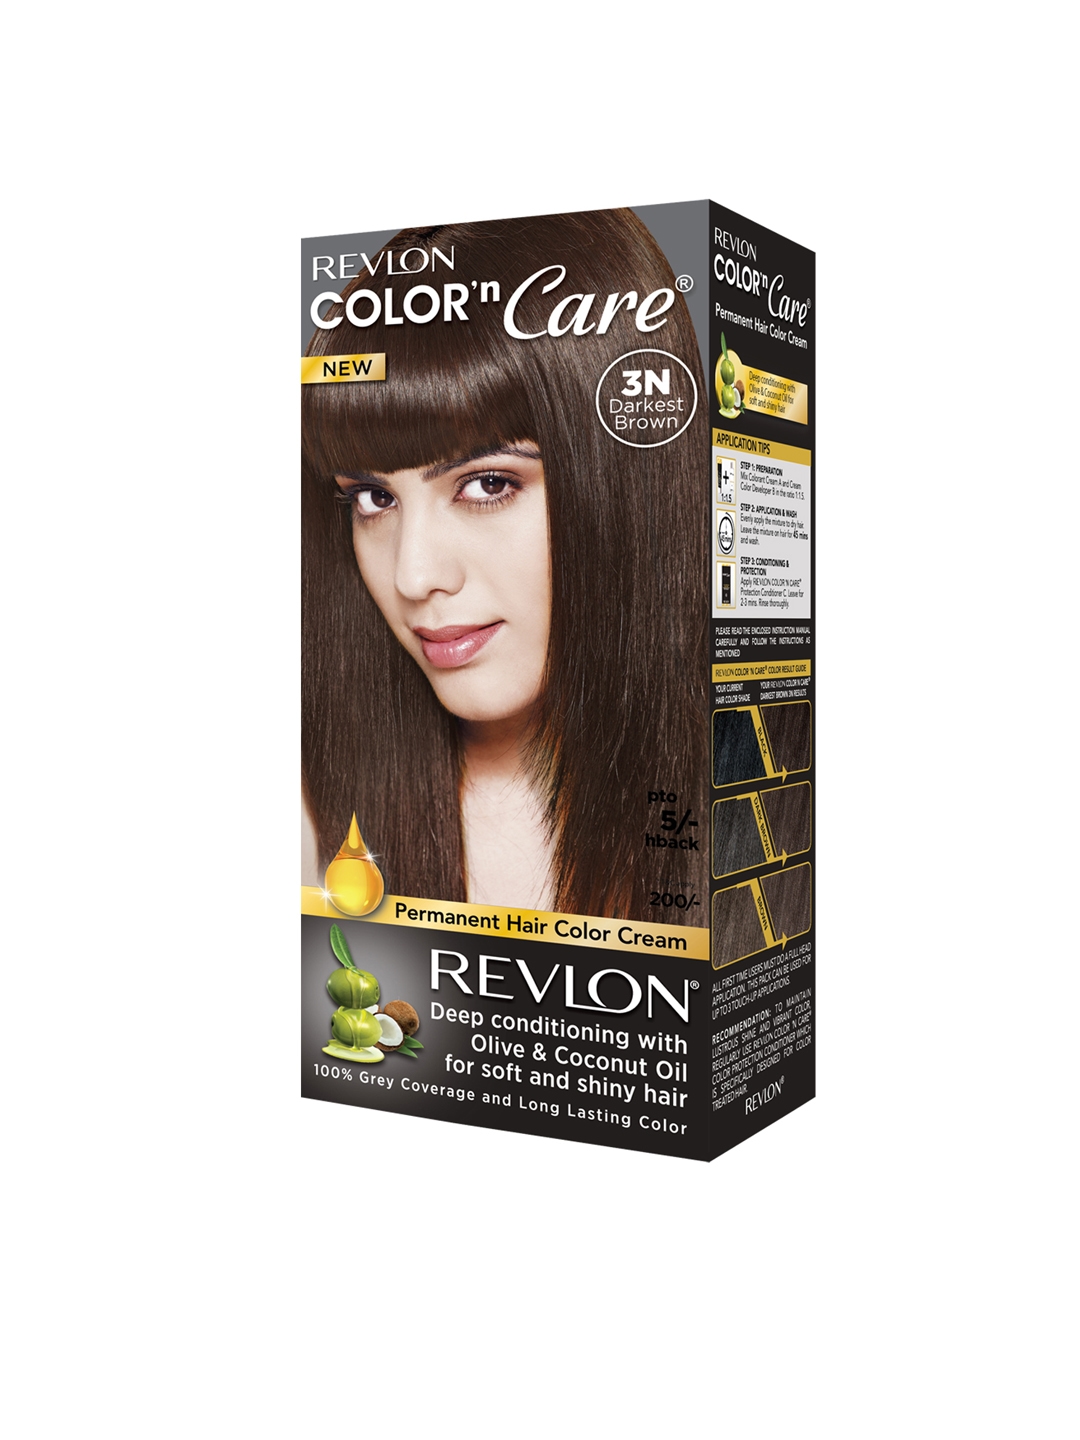 Loreal Paris Now Get Glossy Hair Colour At Just Rupees 169 Ad  Advert  Gallery